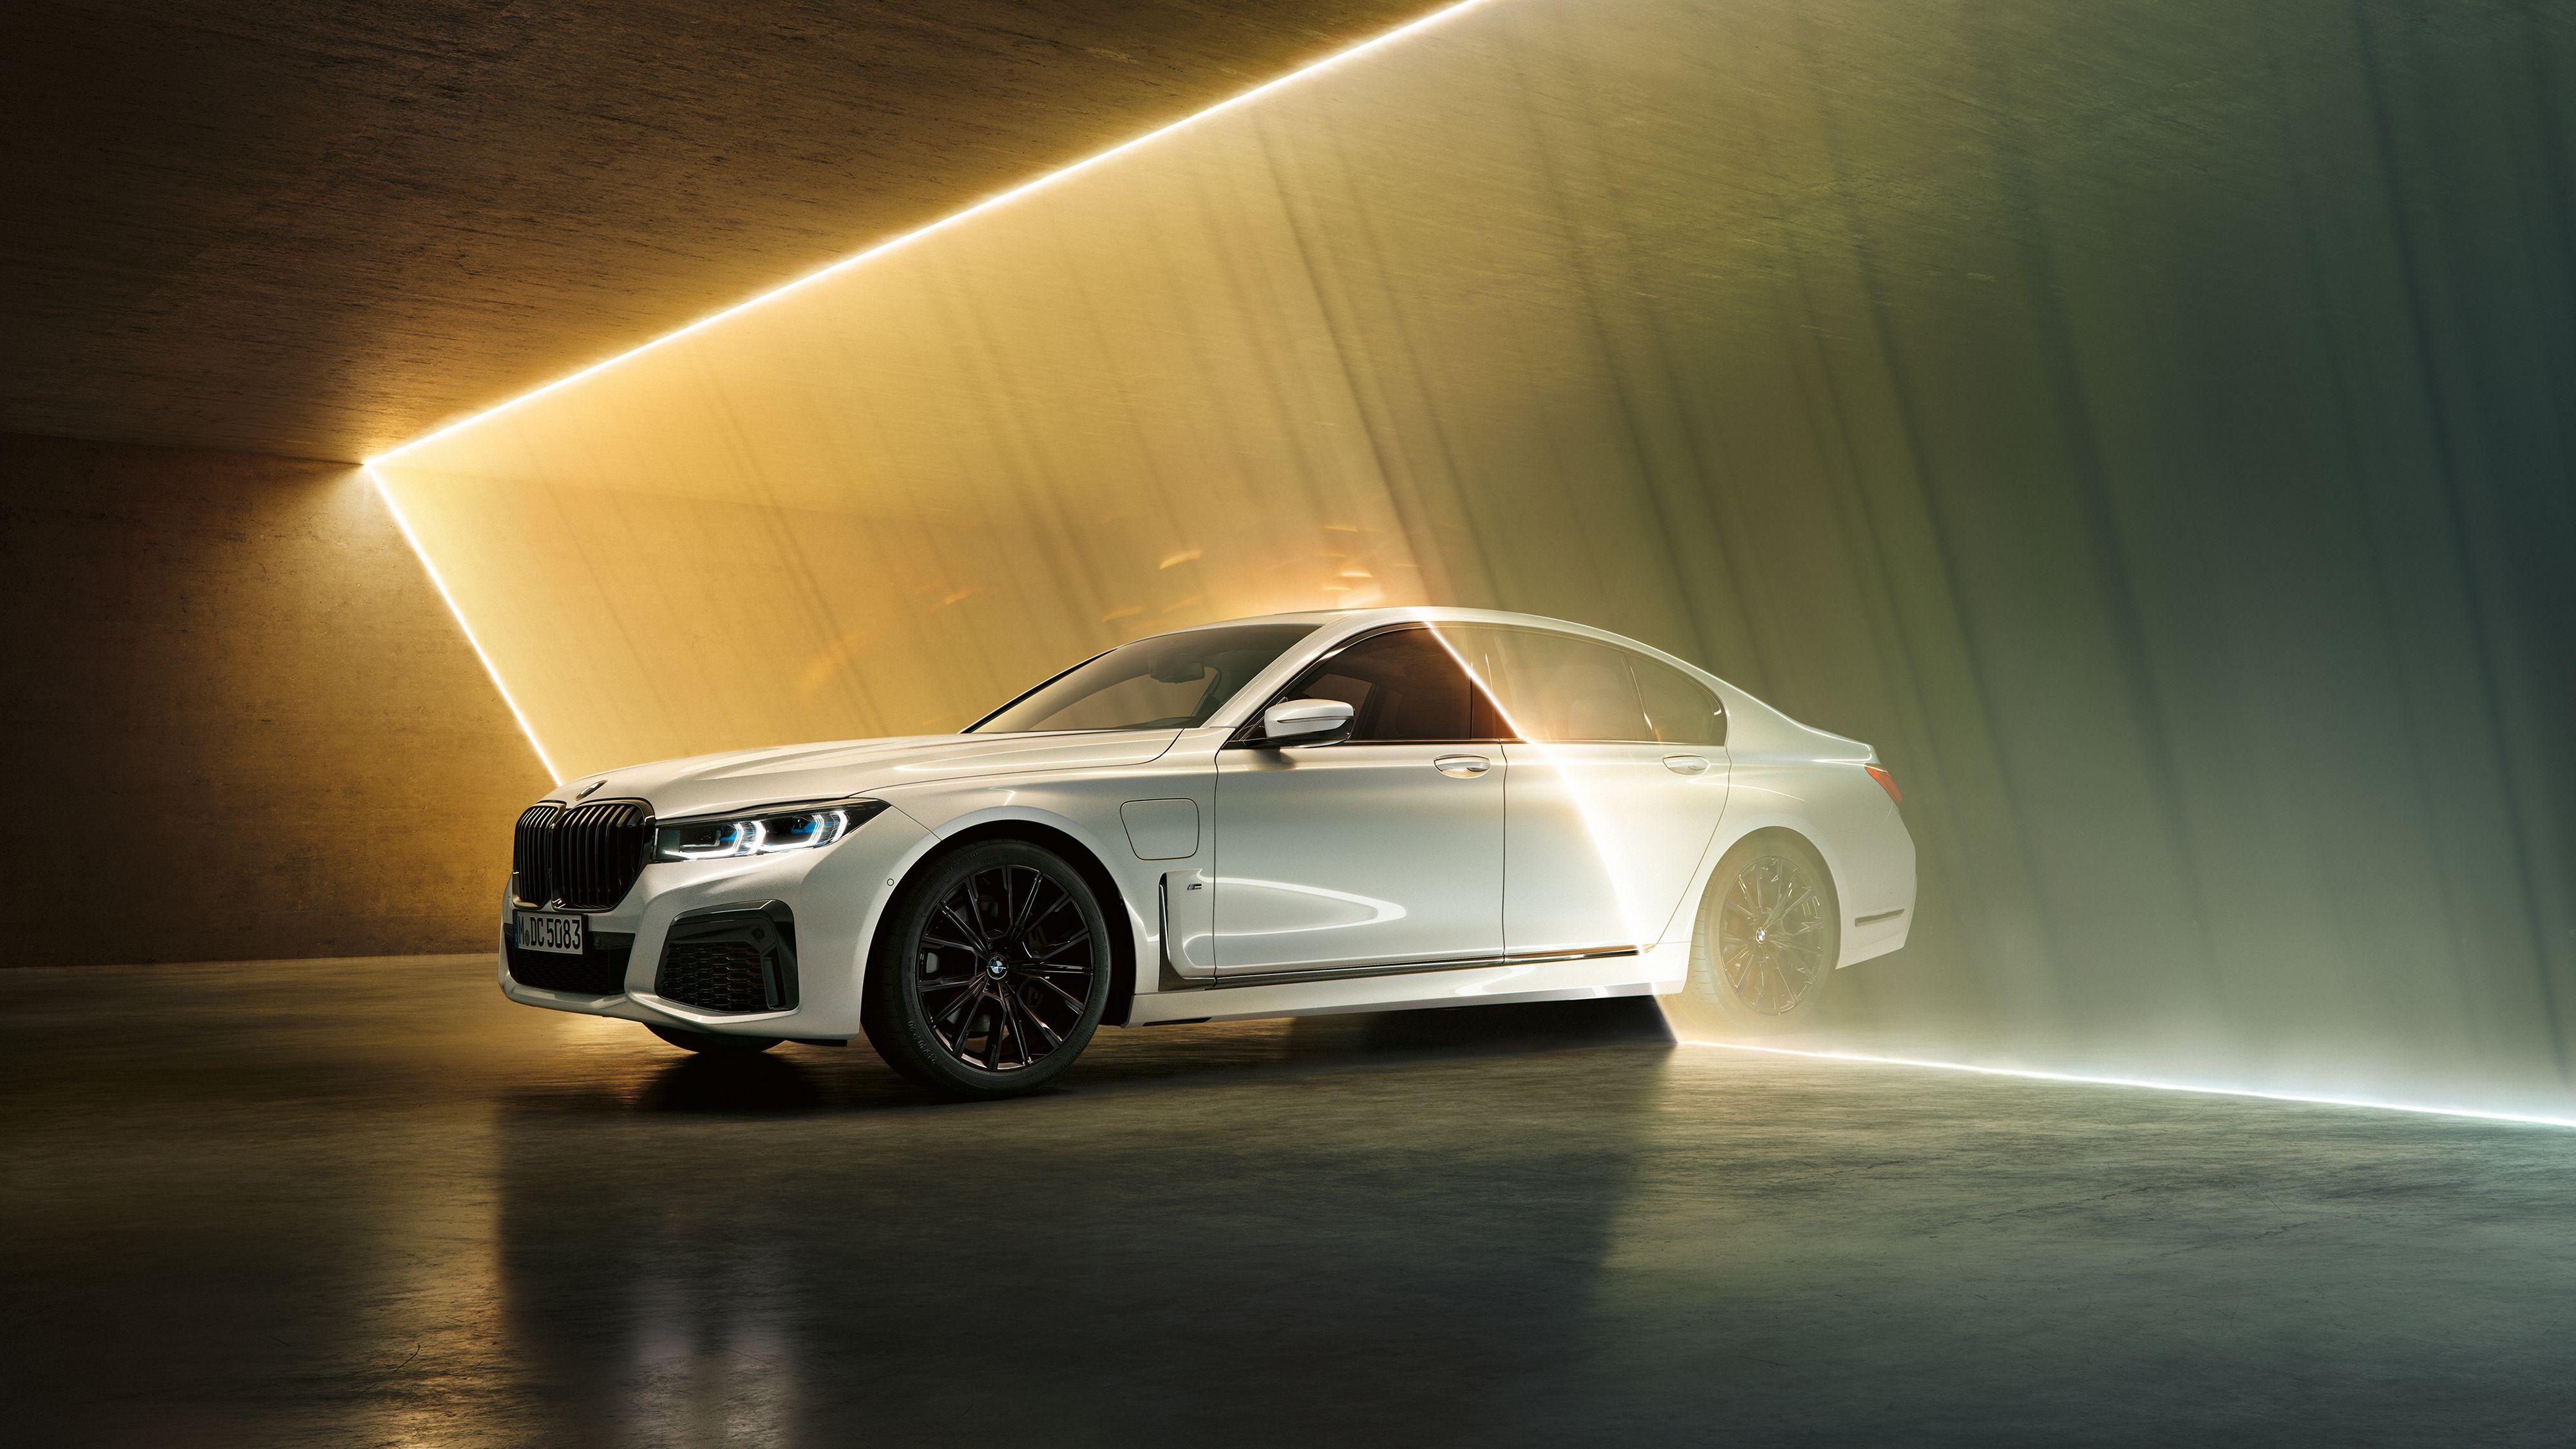 Cool 2020 Bmw Wallpapers Top Free Cool 2020 Bmw Backgrounds Wallpaperaccess